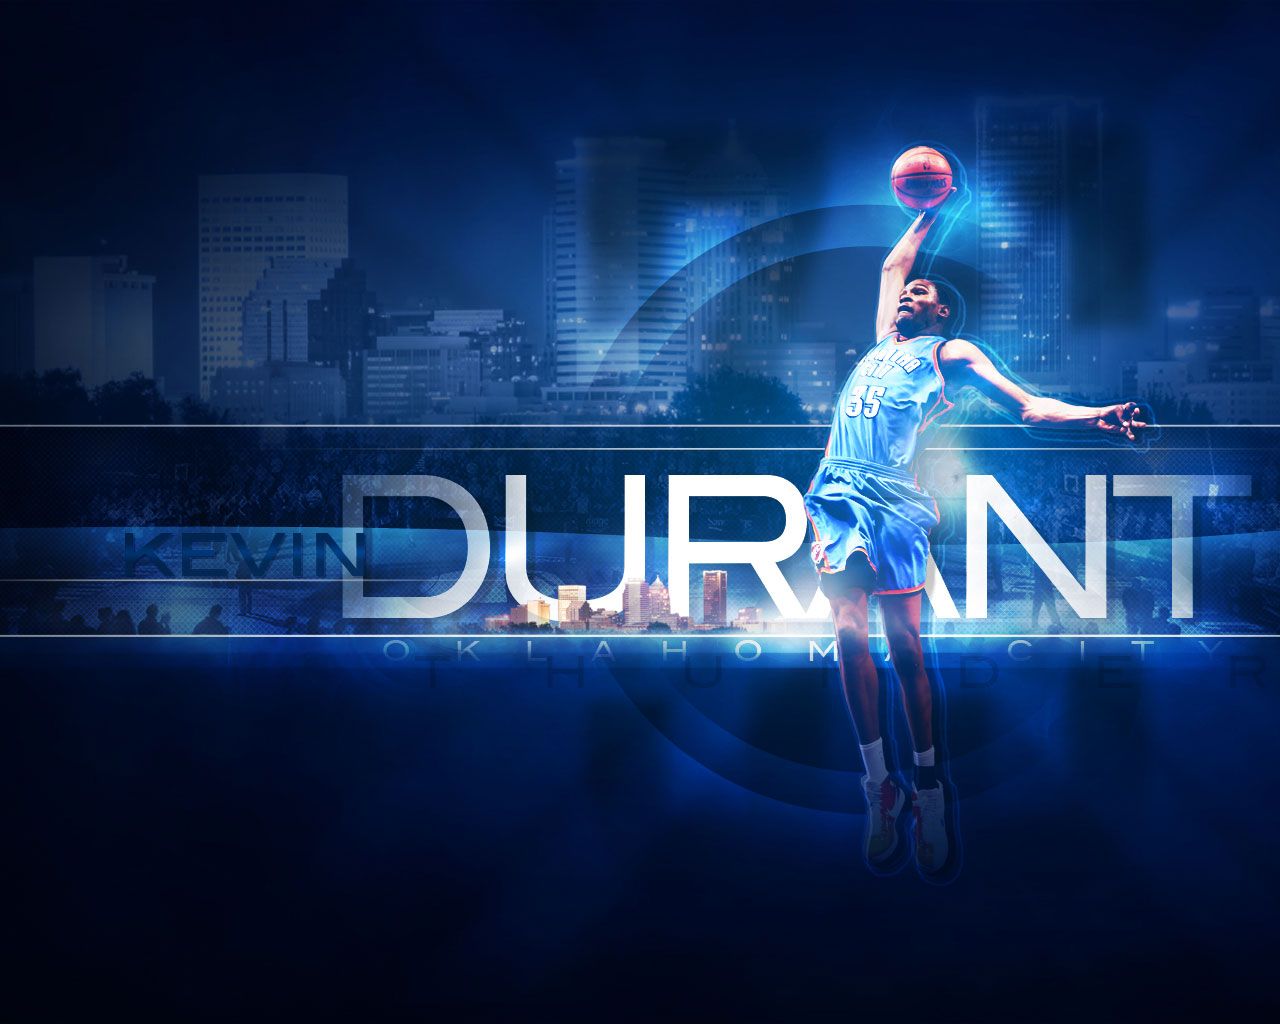 Kevin Durant Wallpaper, Kevin Durant Backgrounds, New Backgrounds